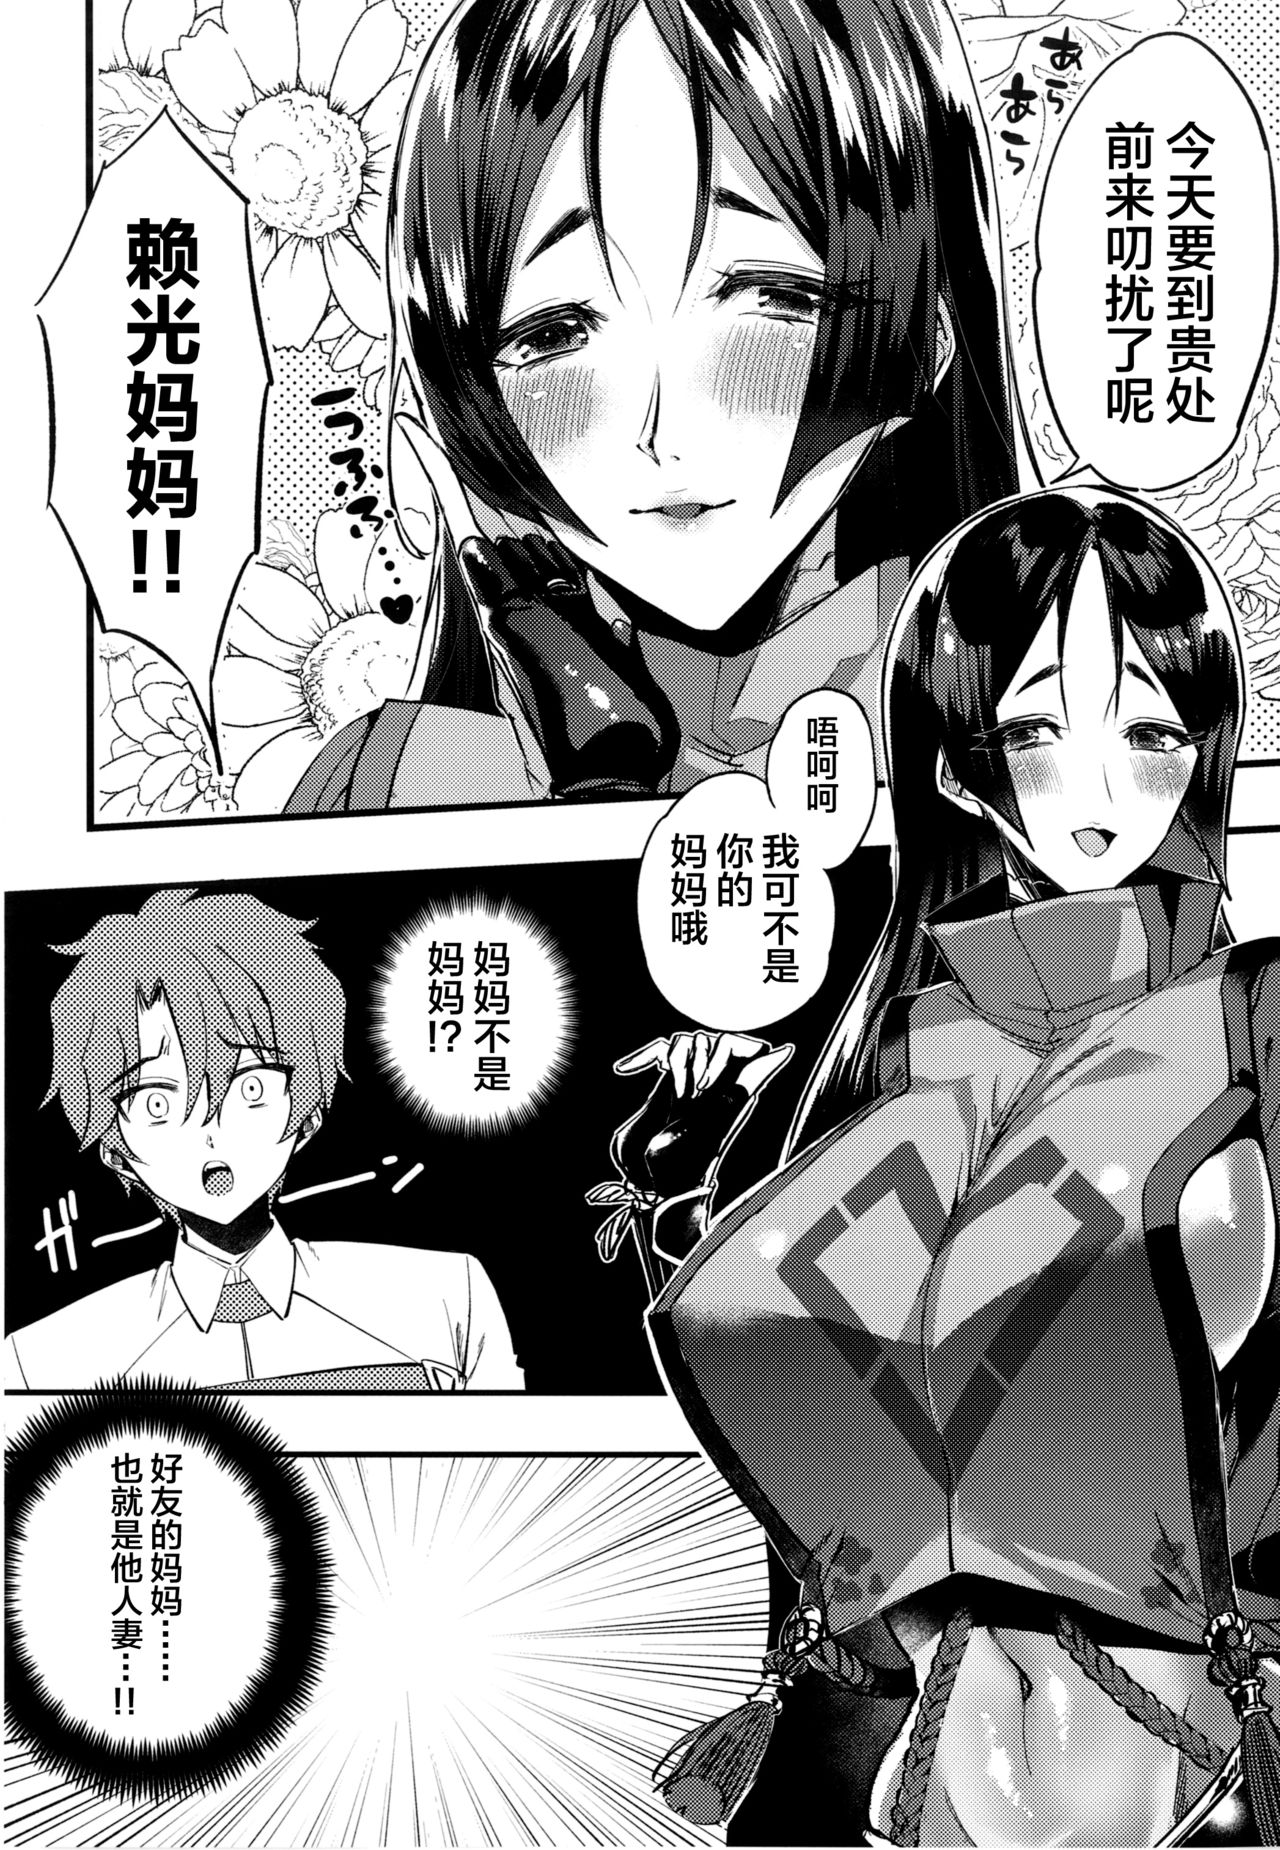 [Chimple Hotters (Chimple Hotter)] +SAPPORT no Raikou Mama to NTR Ecchi (Fate/Grand Order) [Chinese] [黎欧x新桥月白日语社] [Digital] page 6 full